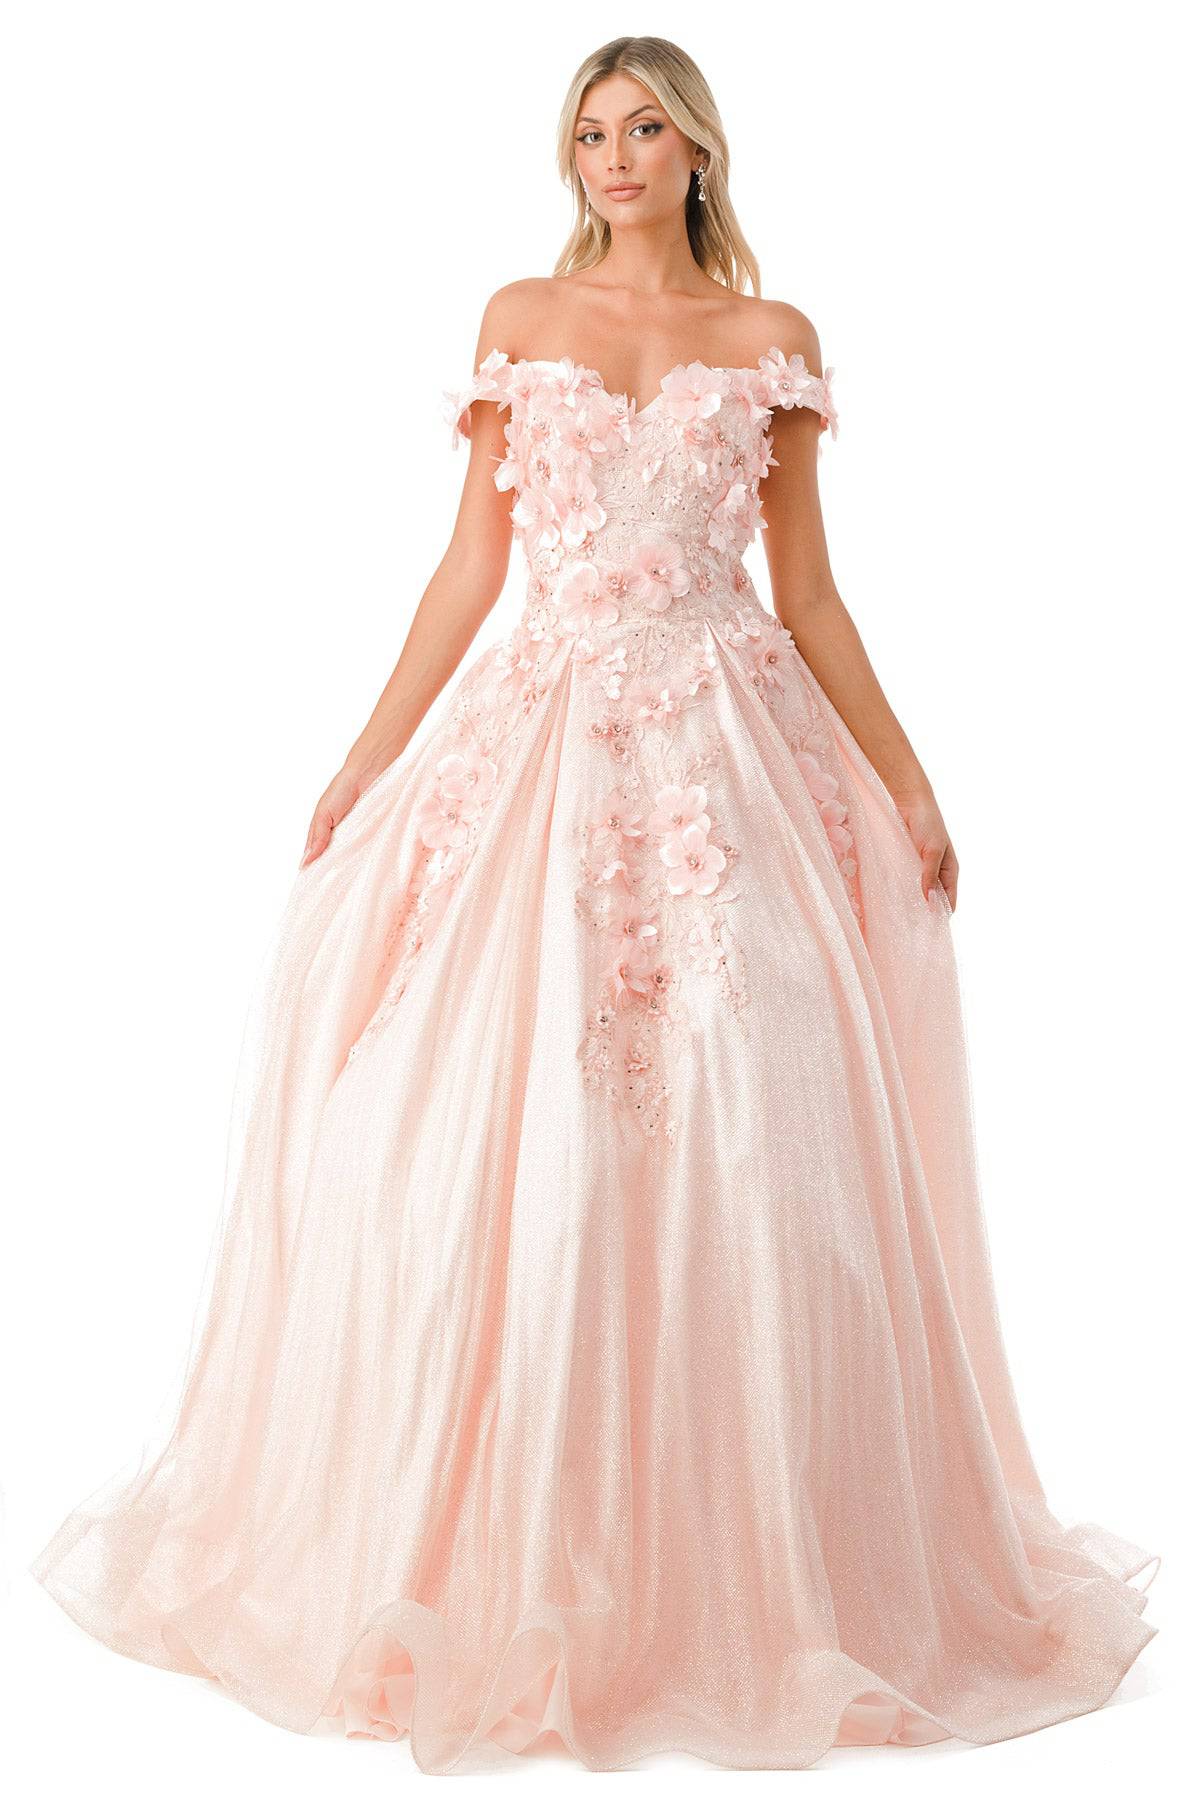 Aspeed L2501 Off Shoulder Floral Ball Gown - NORMA REED